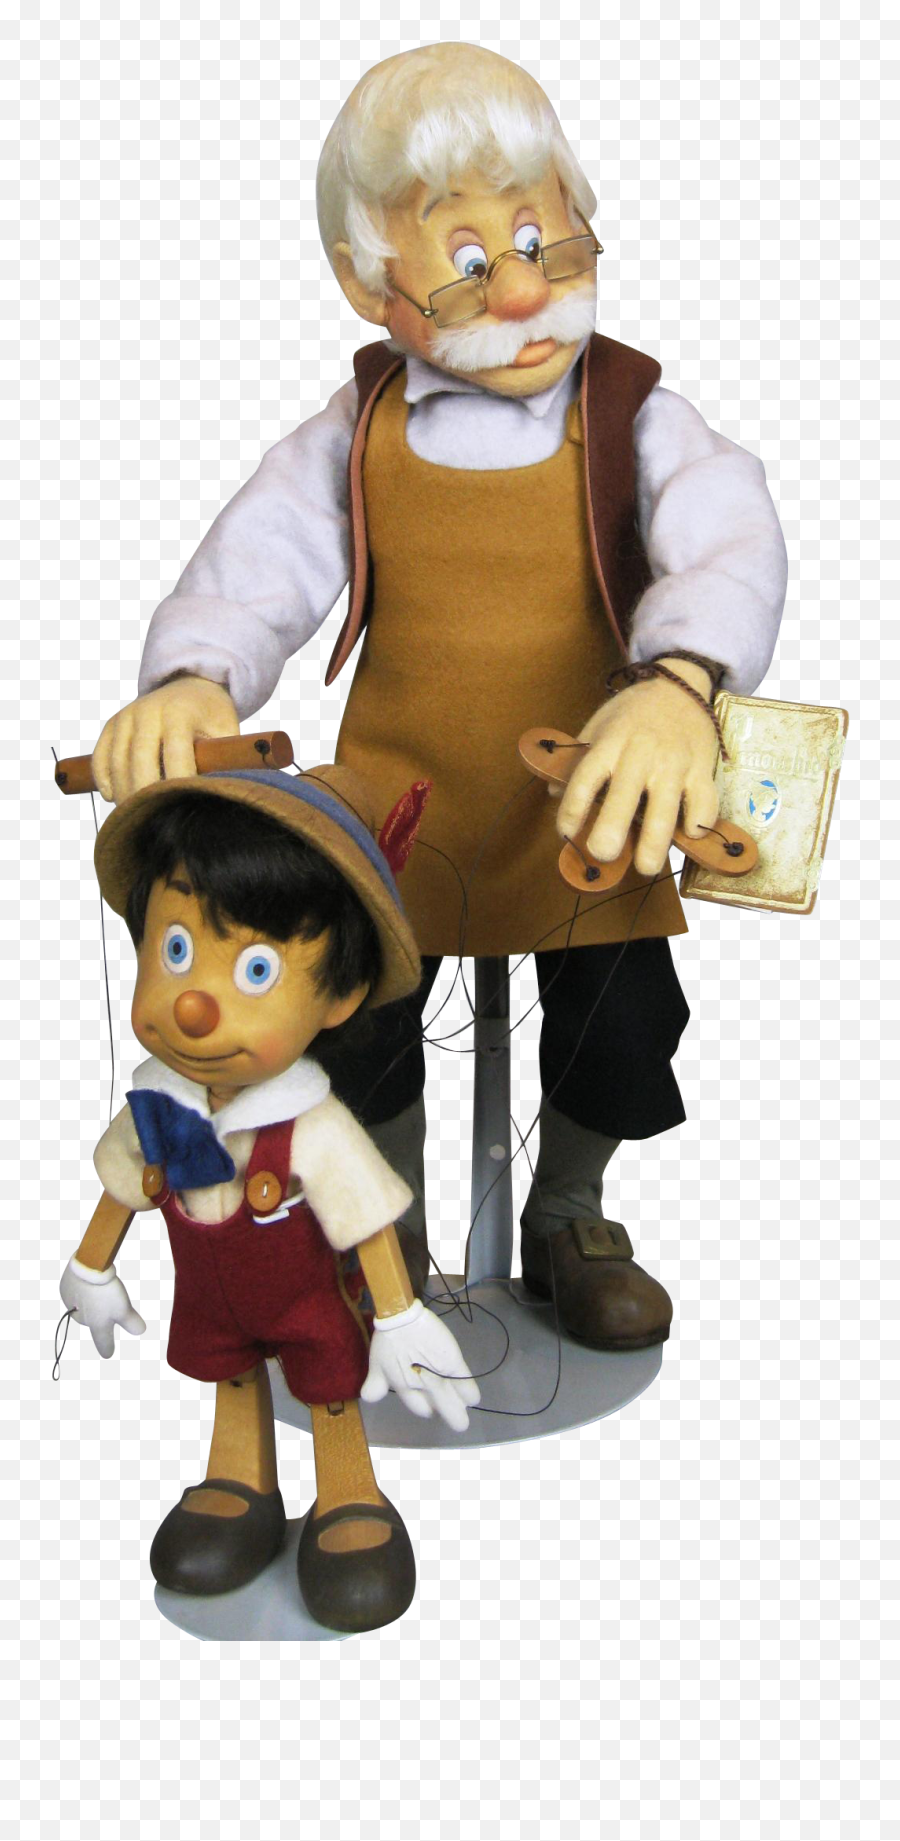 Png Images Pngs Puppet Pinocchio - John Wright Geppetto Pinocchio Emoji,Pinocchio Png